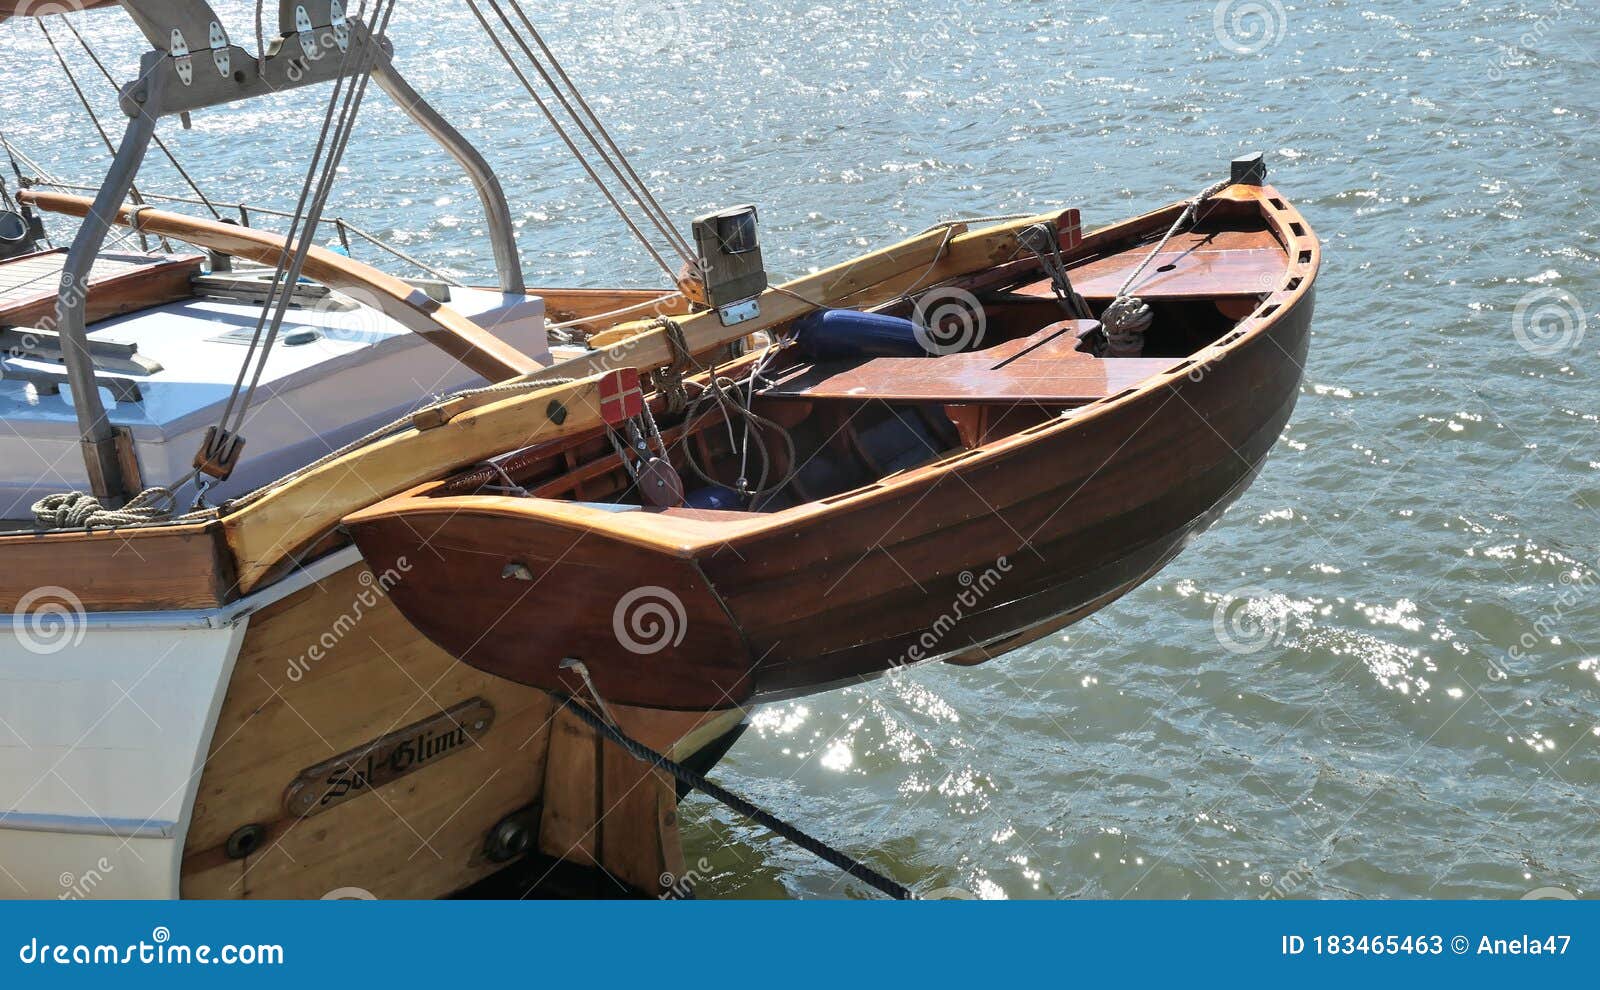 Dinghy, Small Rowing Boat, Made of Mahogany Wood, Attached To the Stern of  a Vintage Sailing Yacht. Schleswig-Holstein, Germany Stock Image - Image of  sailboat, dinghy: 183465463